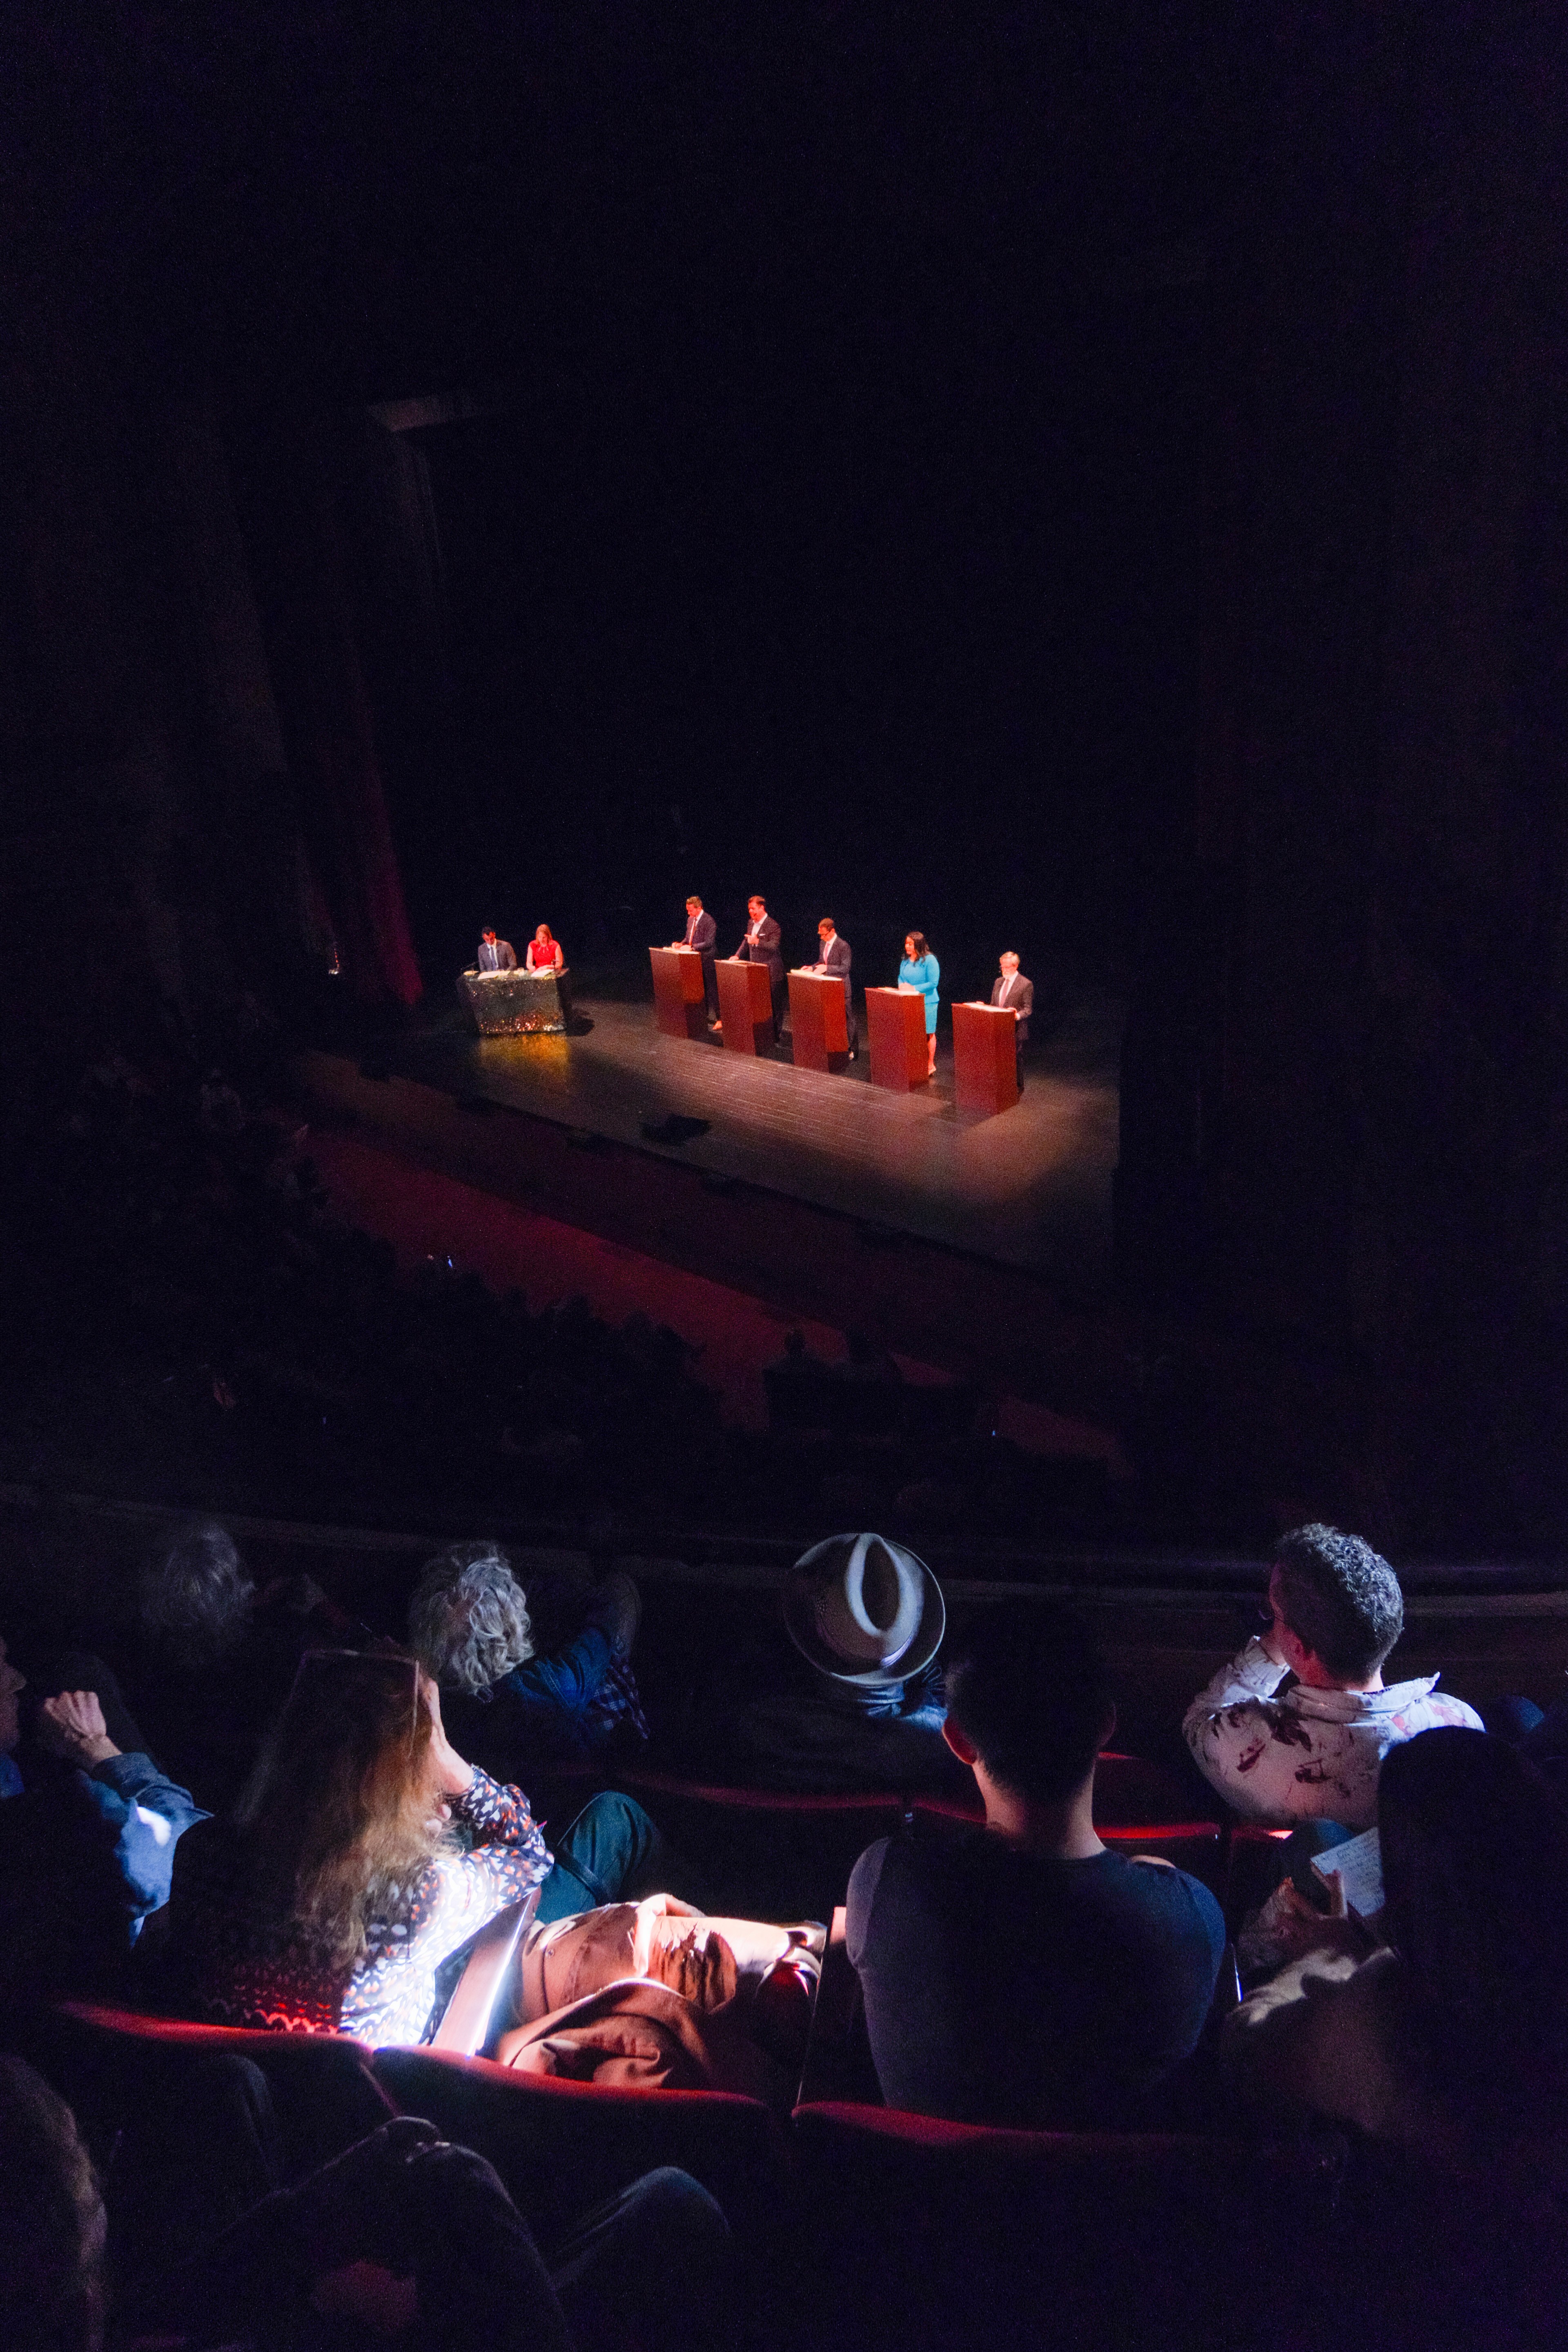 An audience in a theater watches six people at podiums on a stage. The setting is dimly lit, with the focus on the stage and the audience seated in semi-darkness.